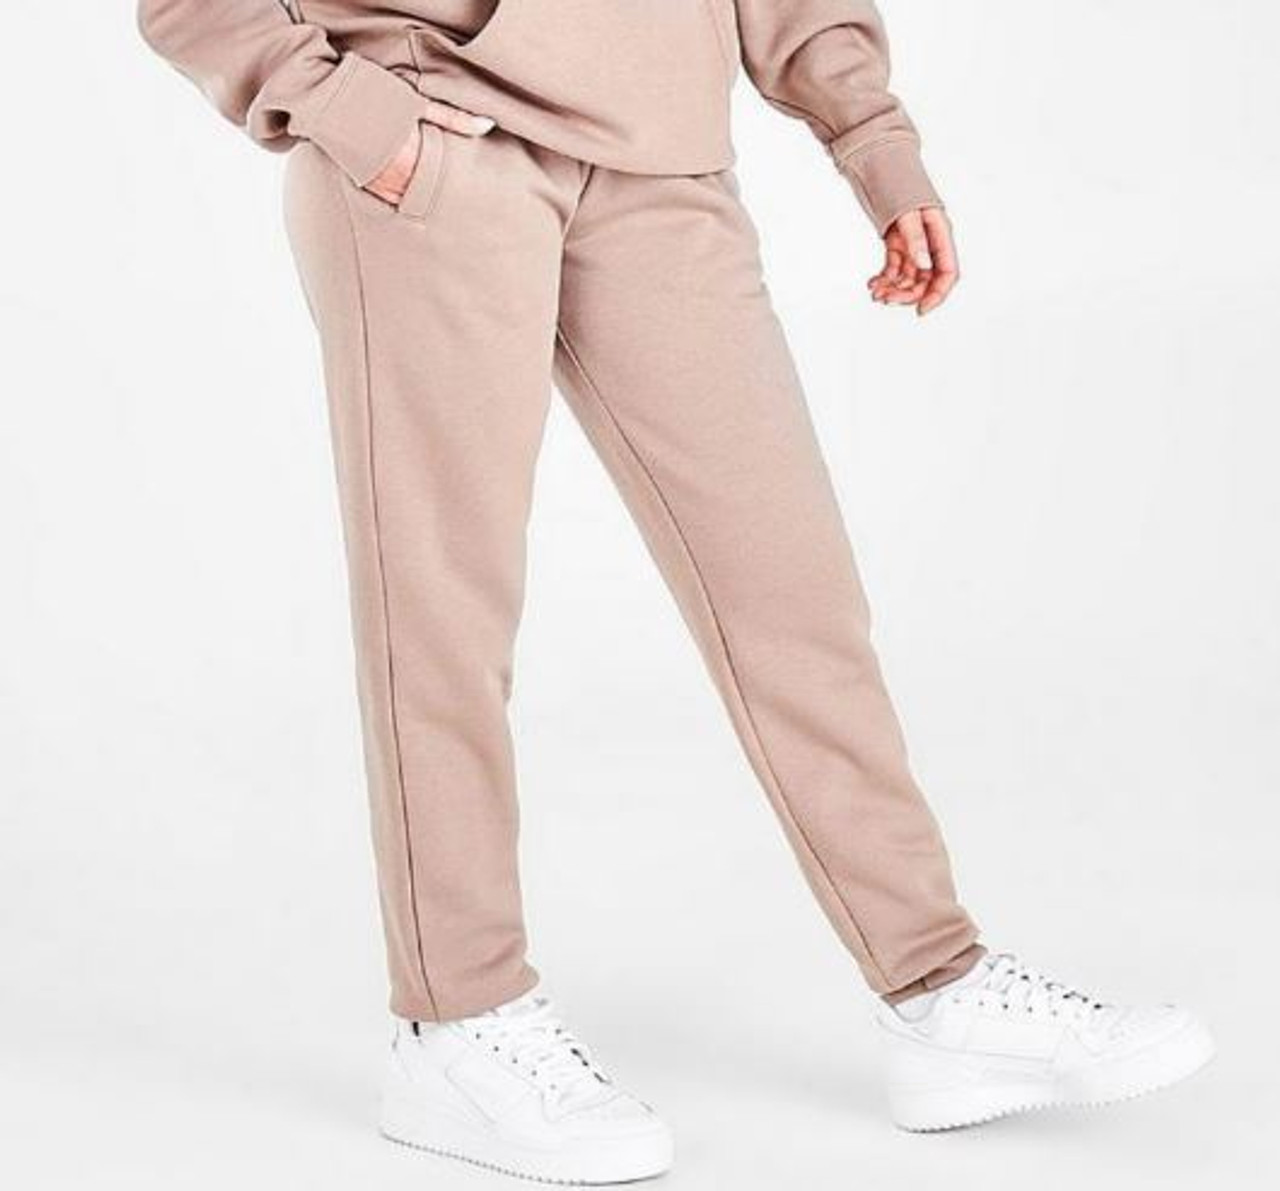 Adidas Women's Original Track Pants, Chalky Brown, Small - Discount Scrubs  and Fashion